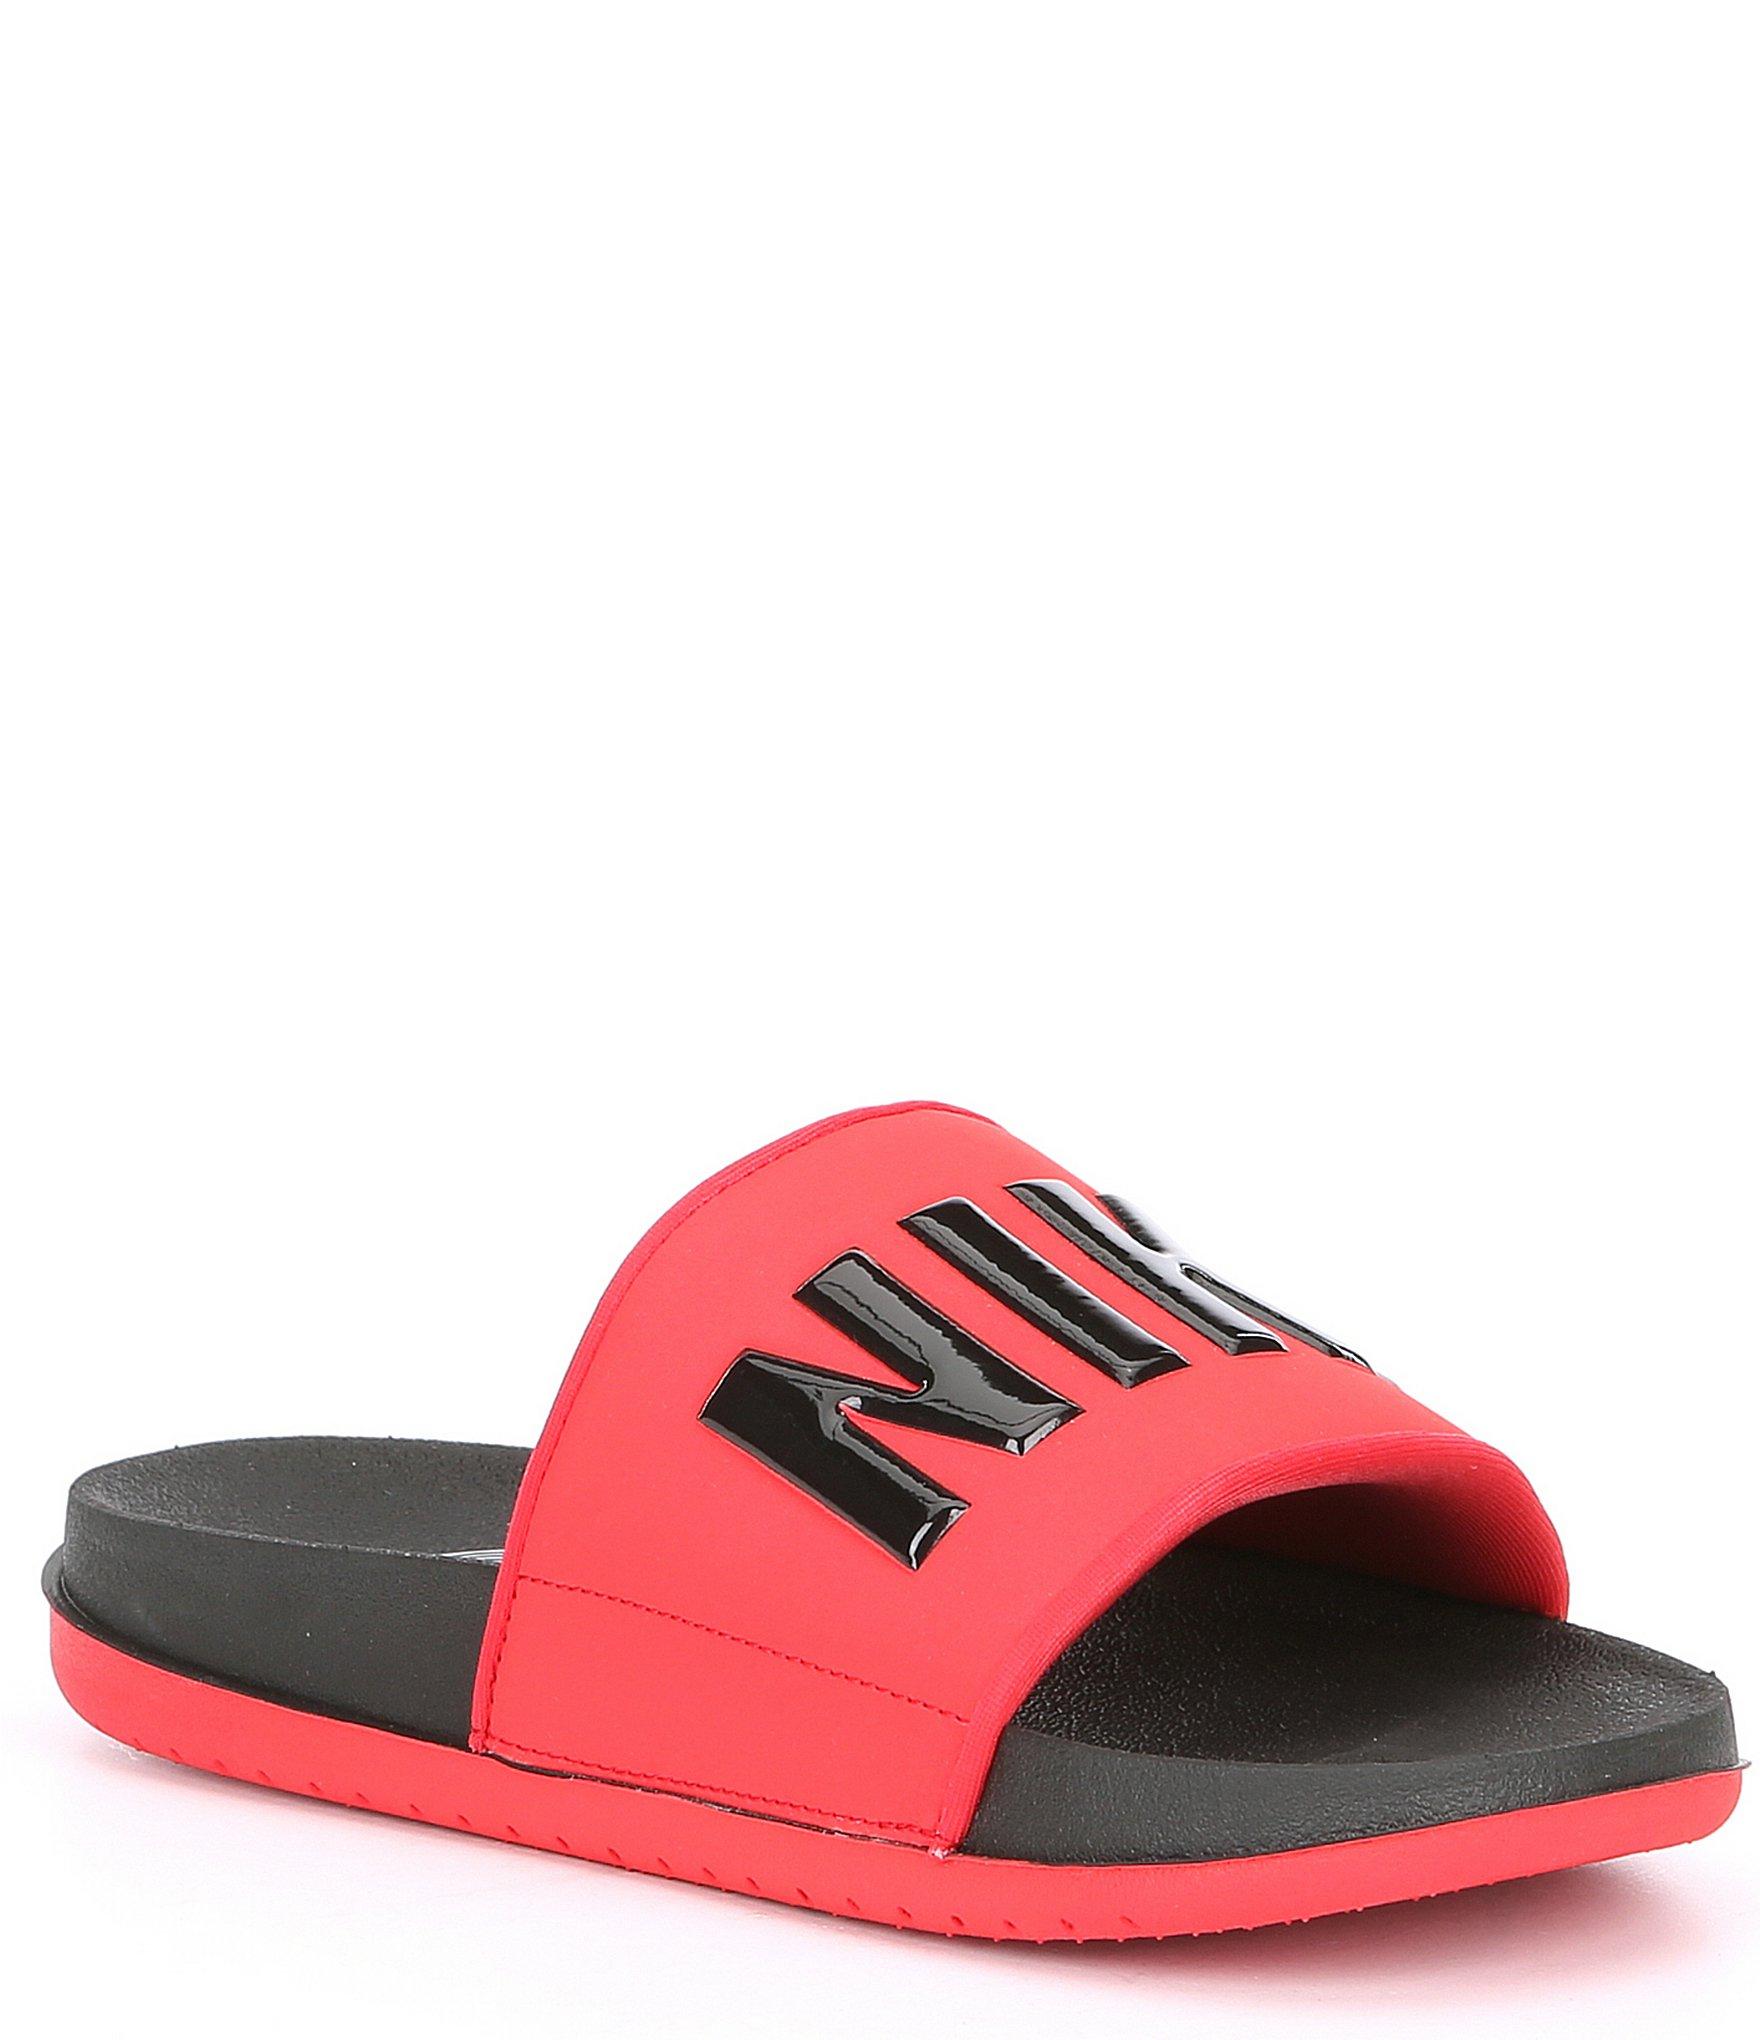 nike sandals red and black